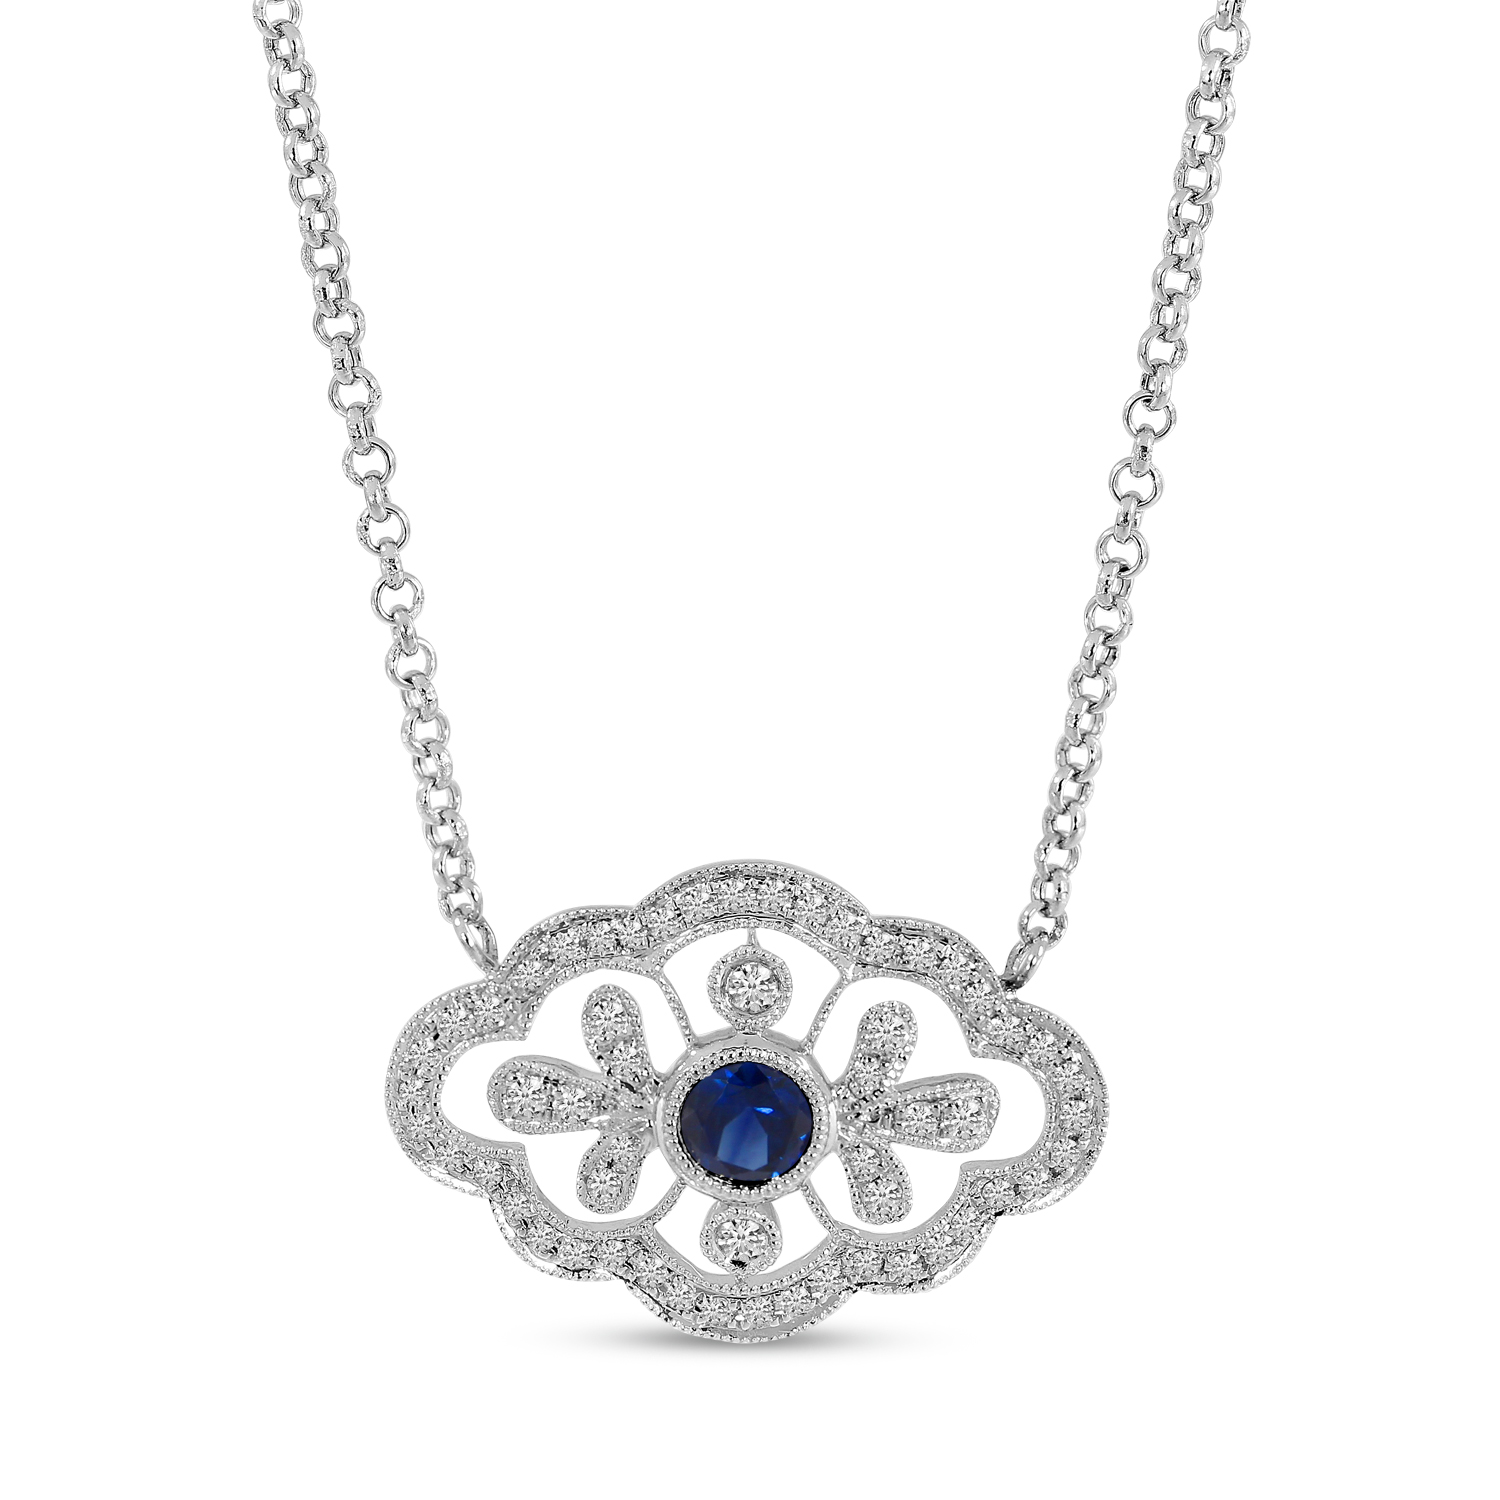 14K White Gold Sapphire & Diamond East 2 West Necklace